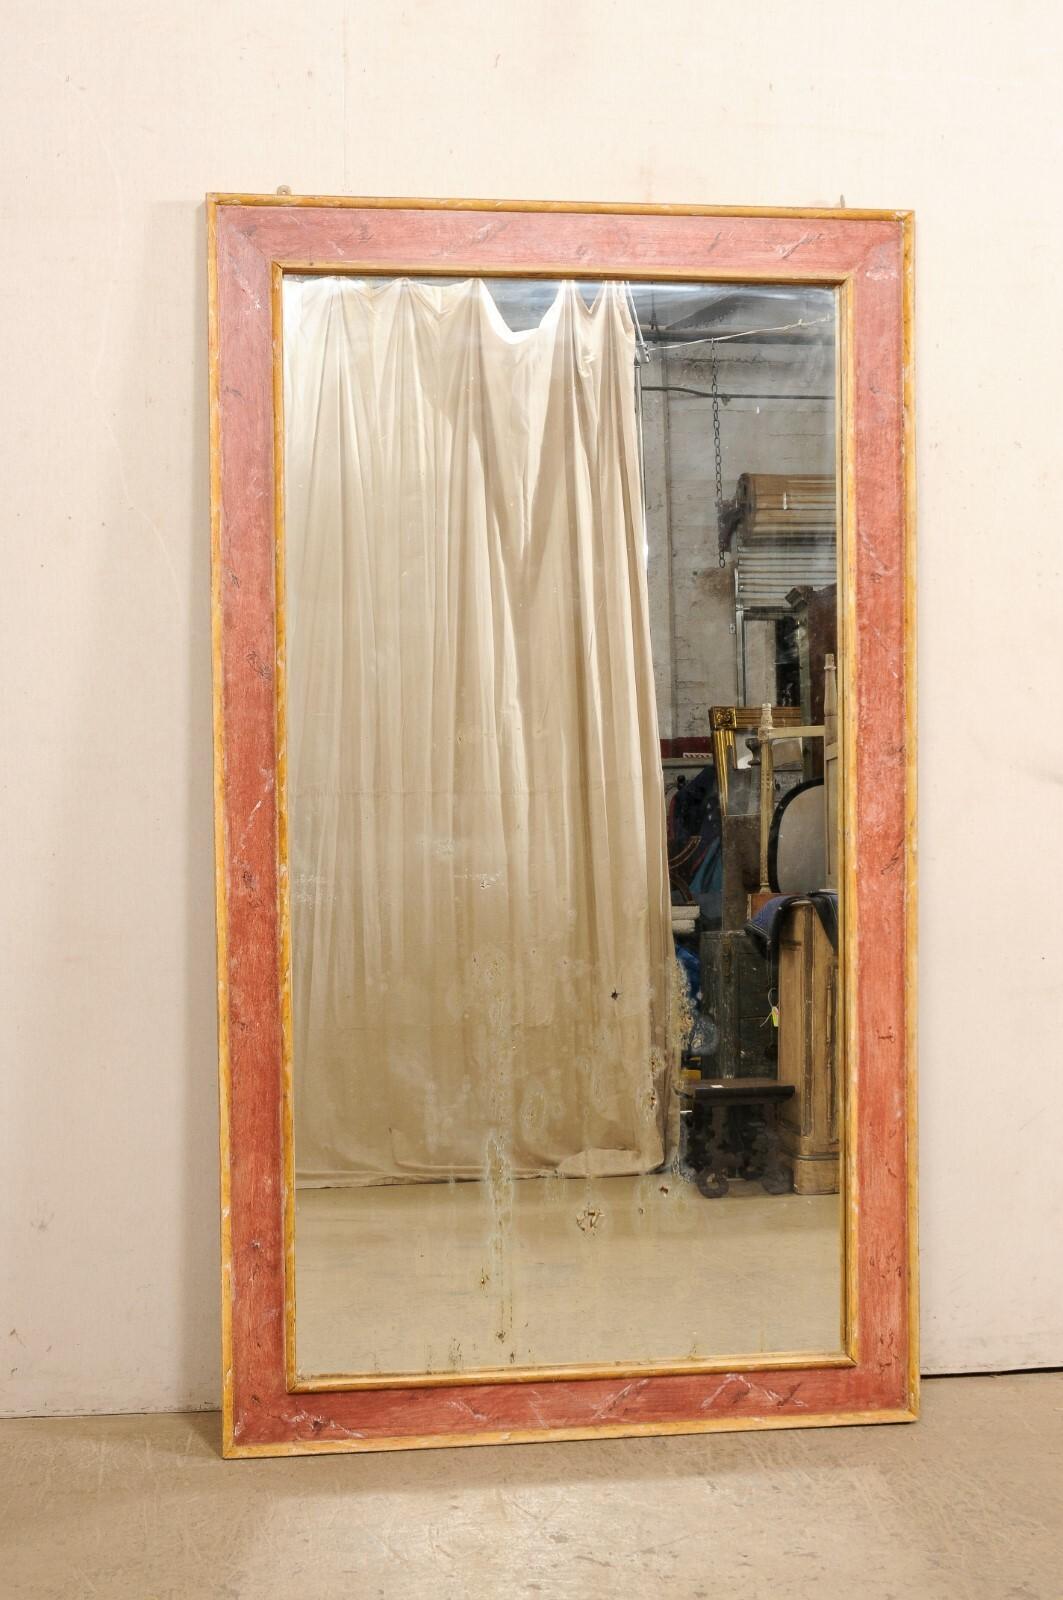 A large-sized Italian mirror, with painted wood surround, from the 19th century. This antique tall mirror from Italy is rectangular in shape, with a wooden surround designed with clean lines, framing the glass at center. The finish is a dusty rose